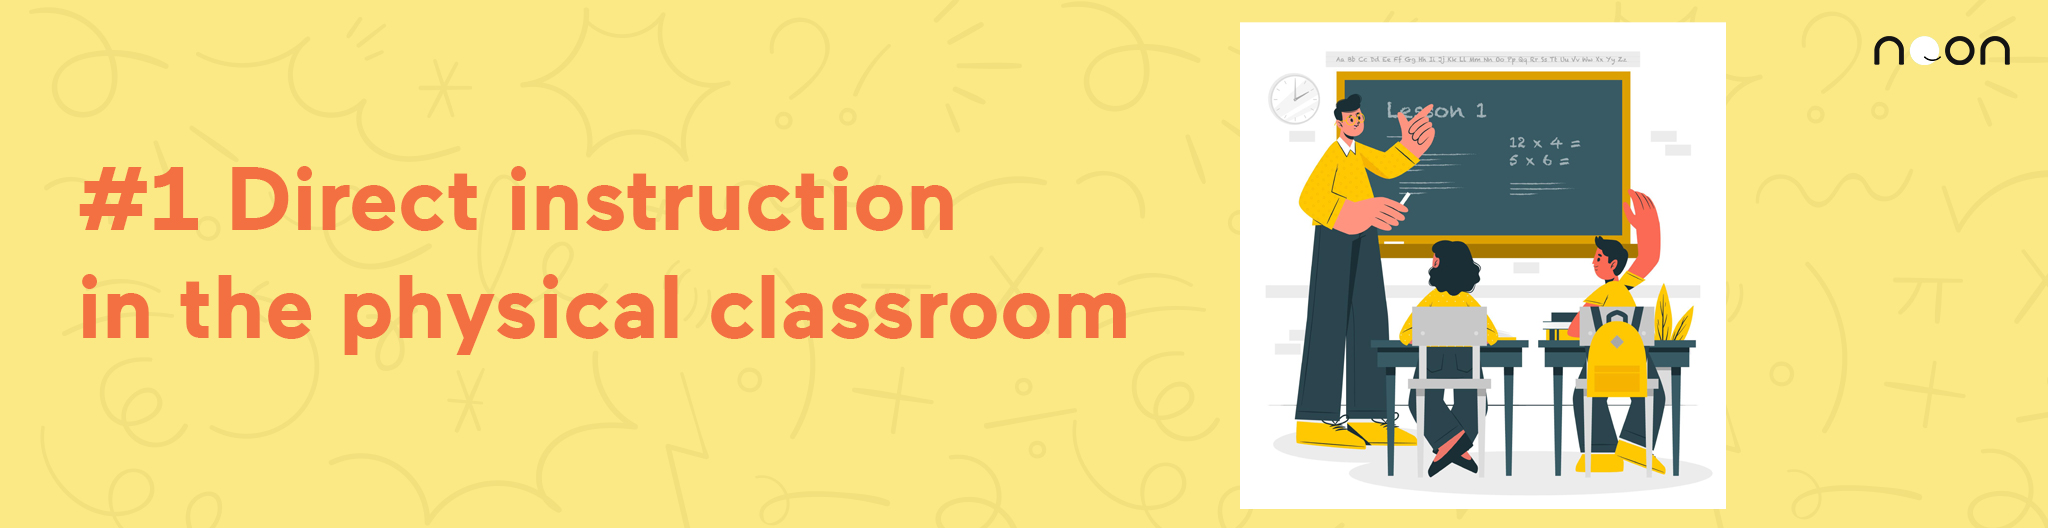 Direct instruction in the physical classroom